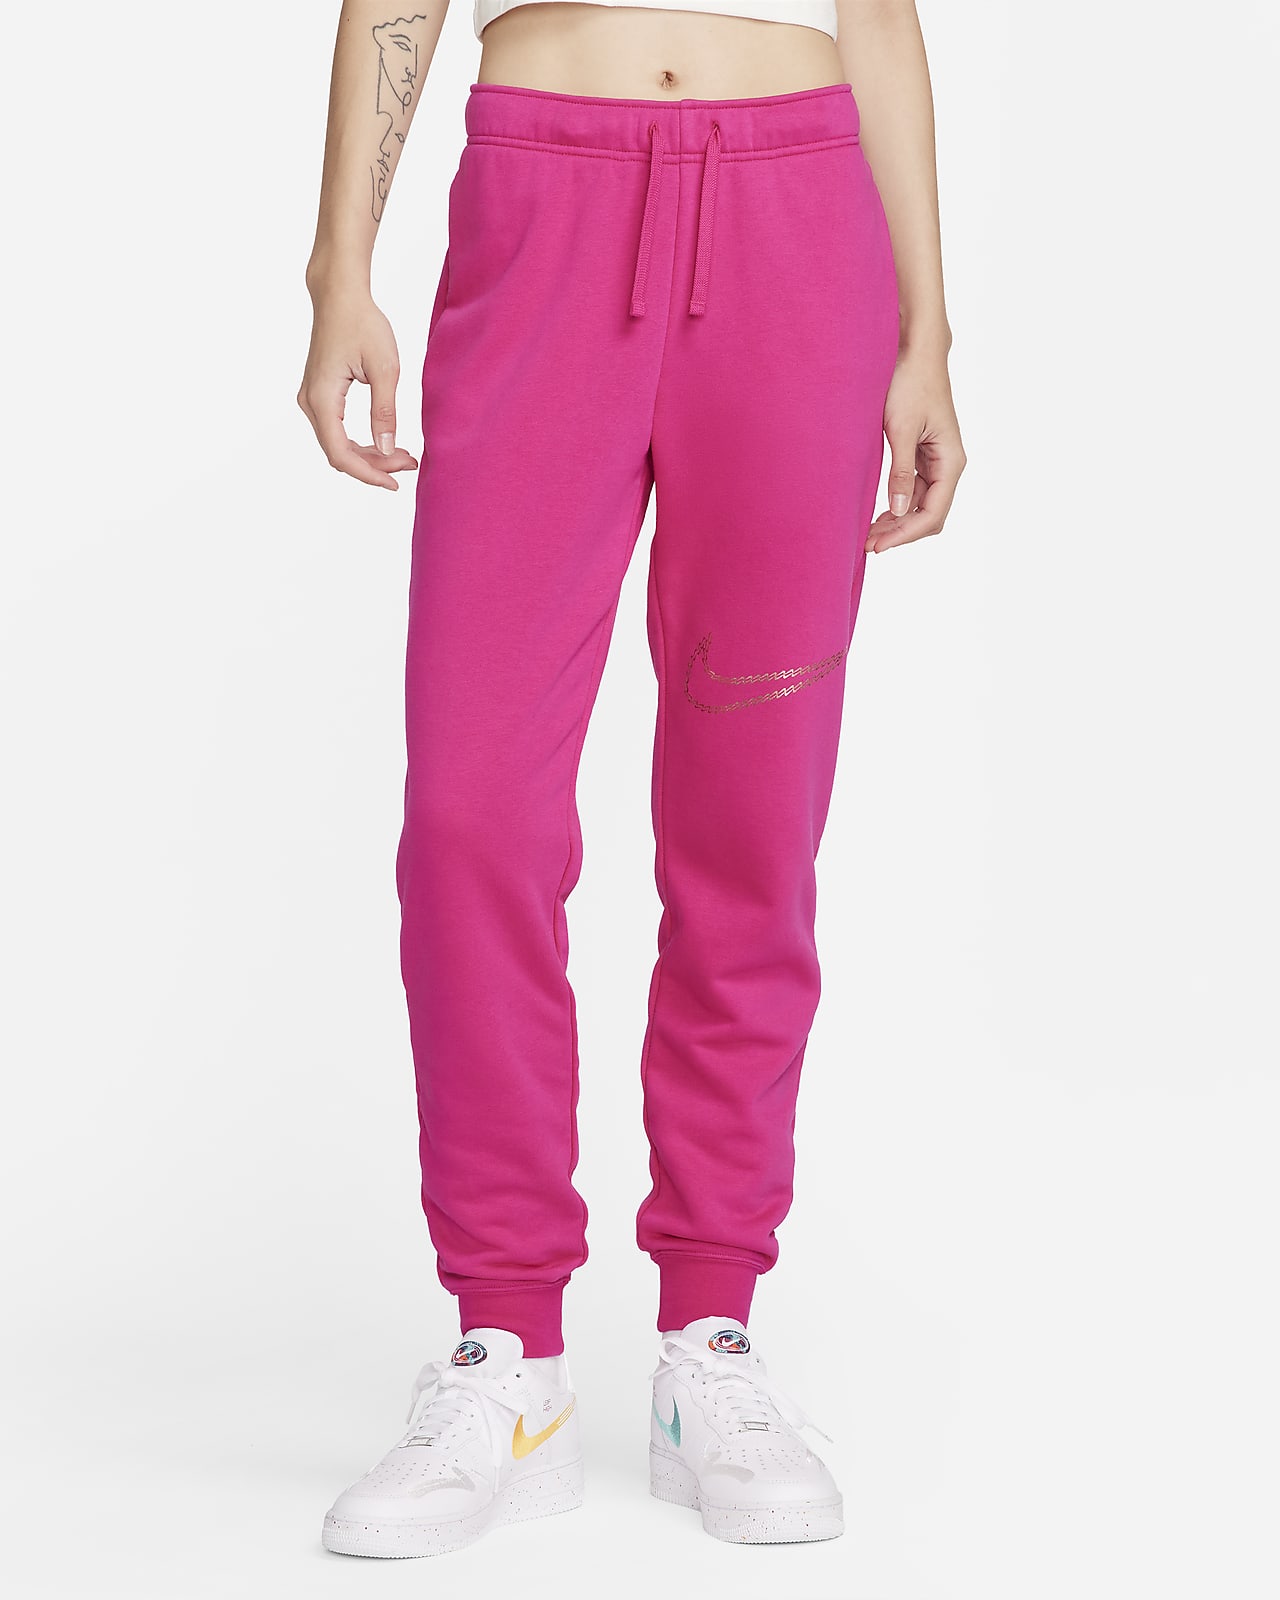 Mujer Completo Pants. Nike MX